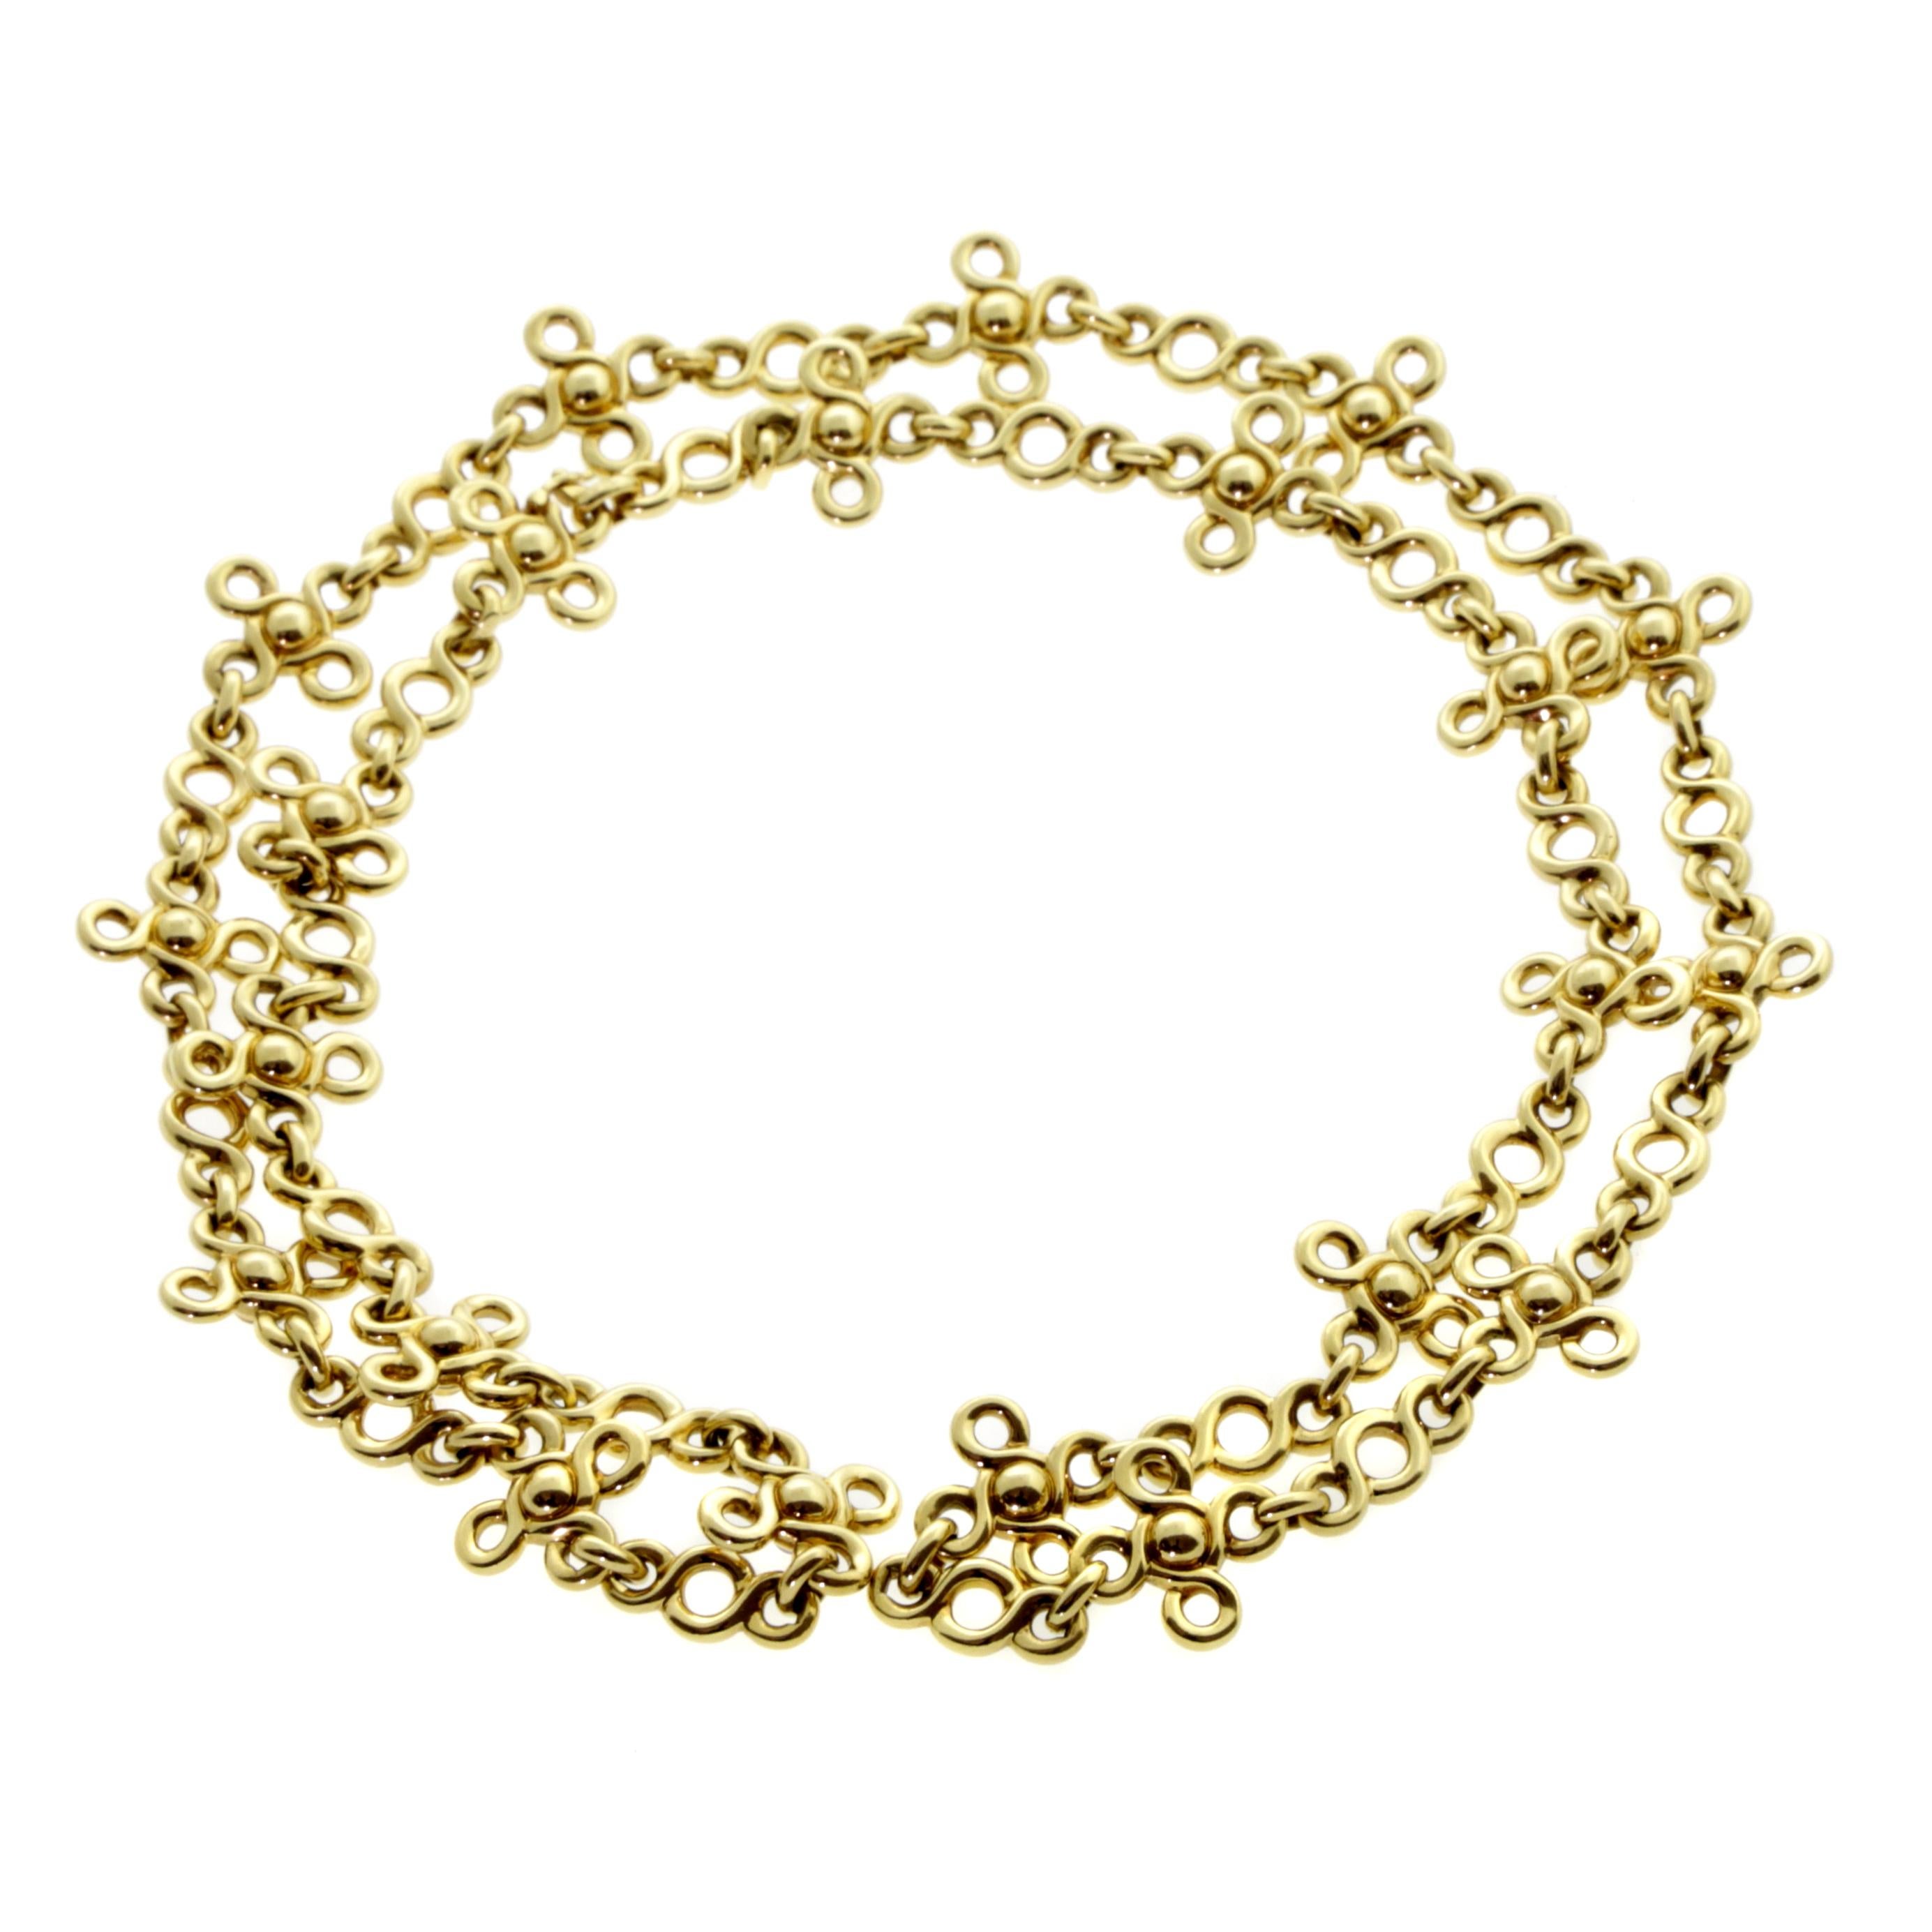 Chanel Gemstone Gold Sautoir Necklace In Excellent Condition For Sale In Feasterville, PA